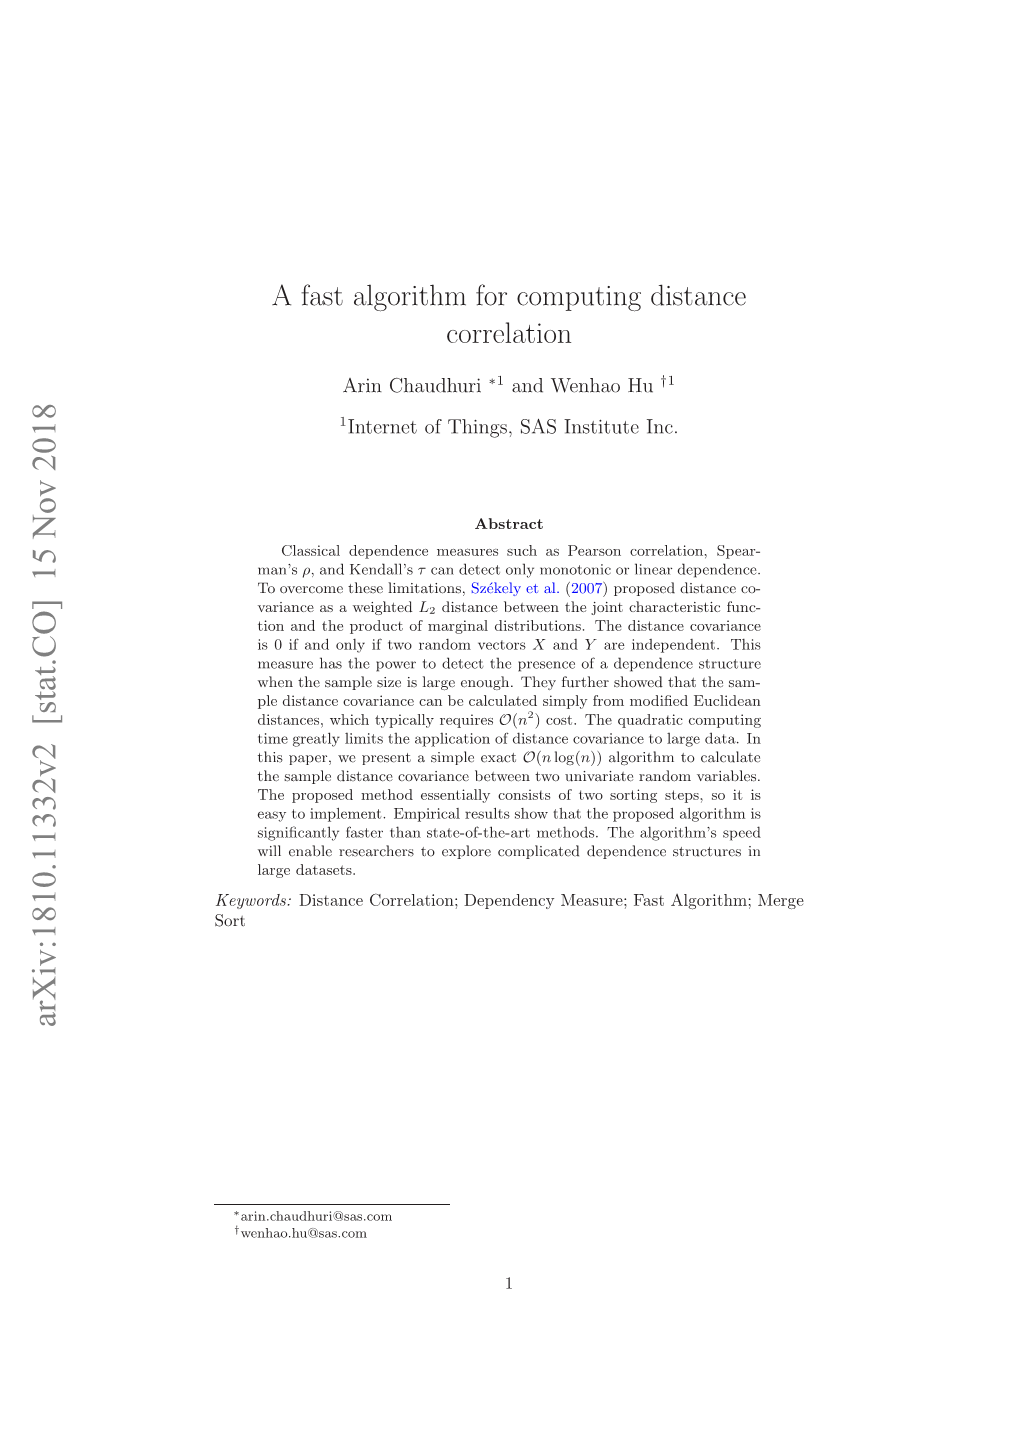 A Fast Algorithm for Computing Distance Correlation